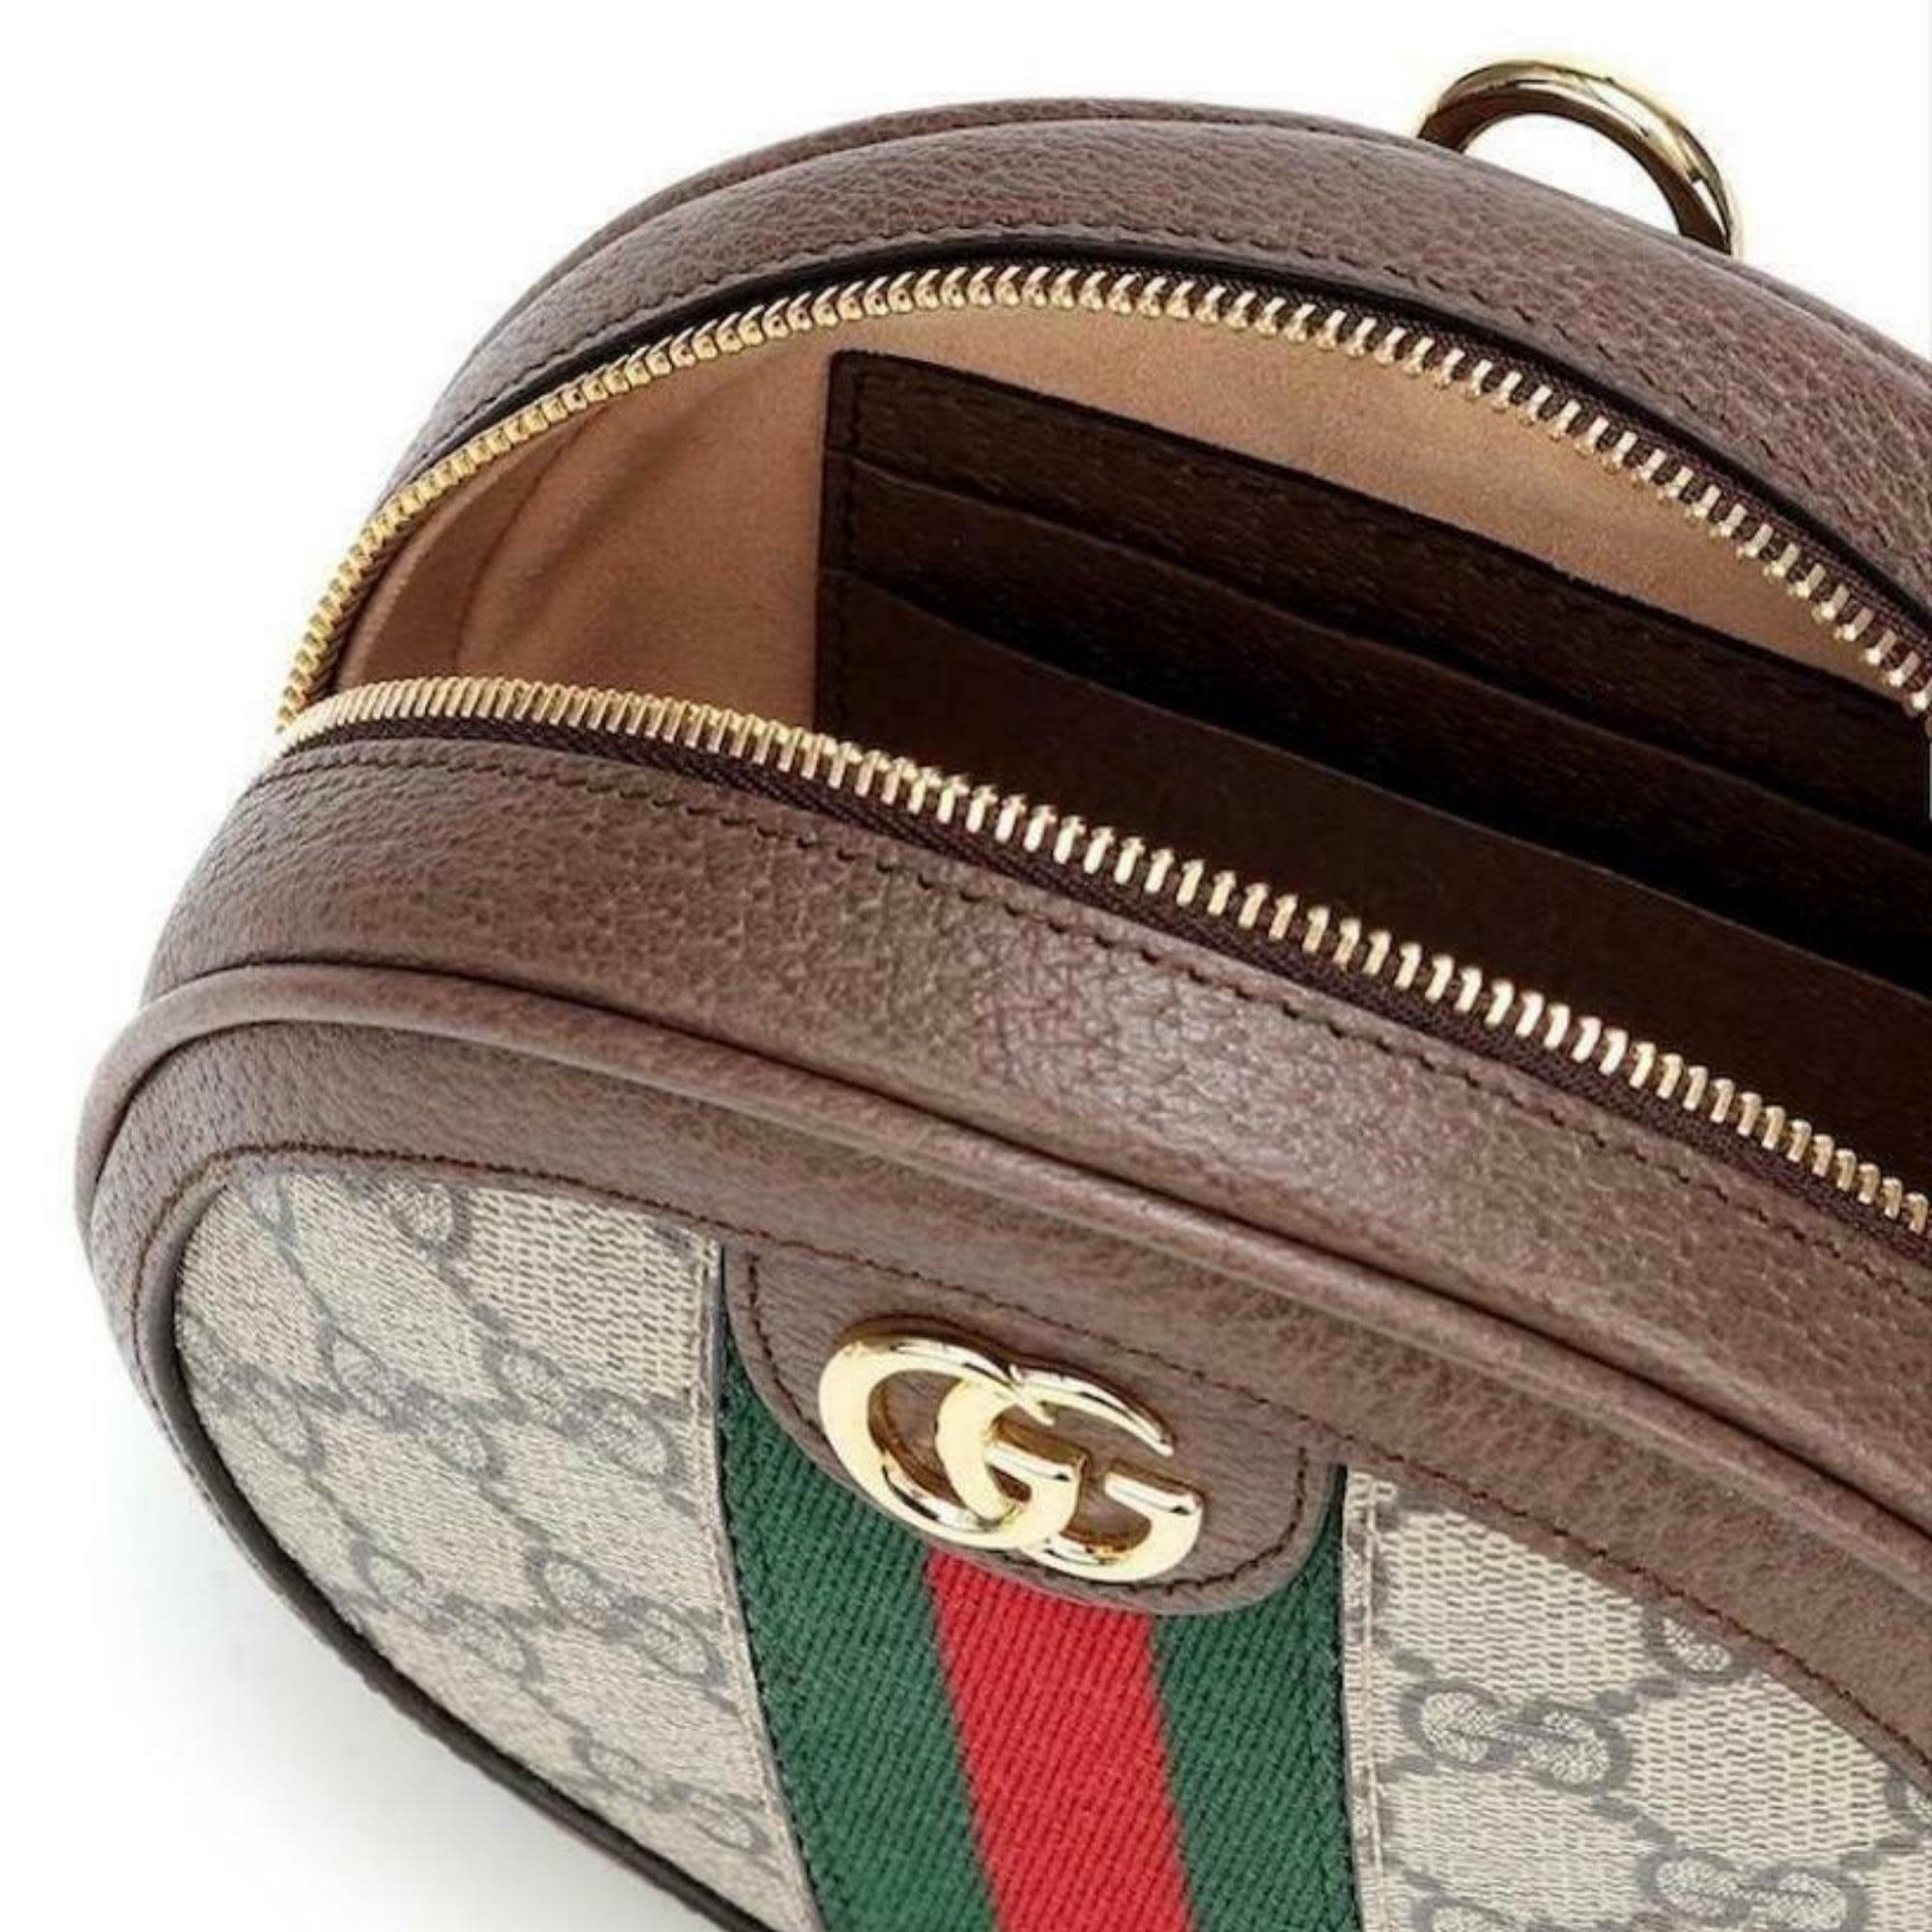 GUCCI GG SUPREME OPHIDIA ROUND MINI BACKPACK (598667) - CRTBLNCHSHP